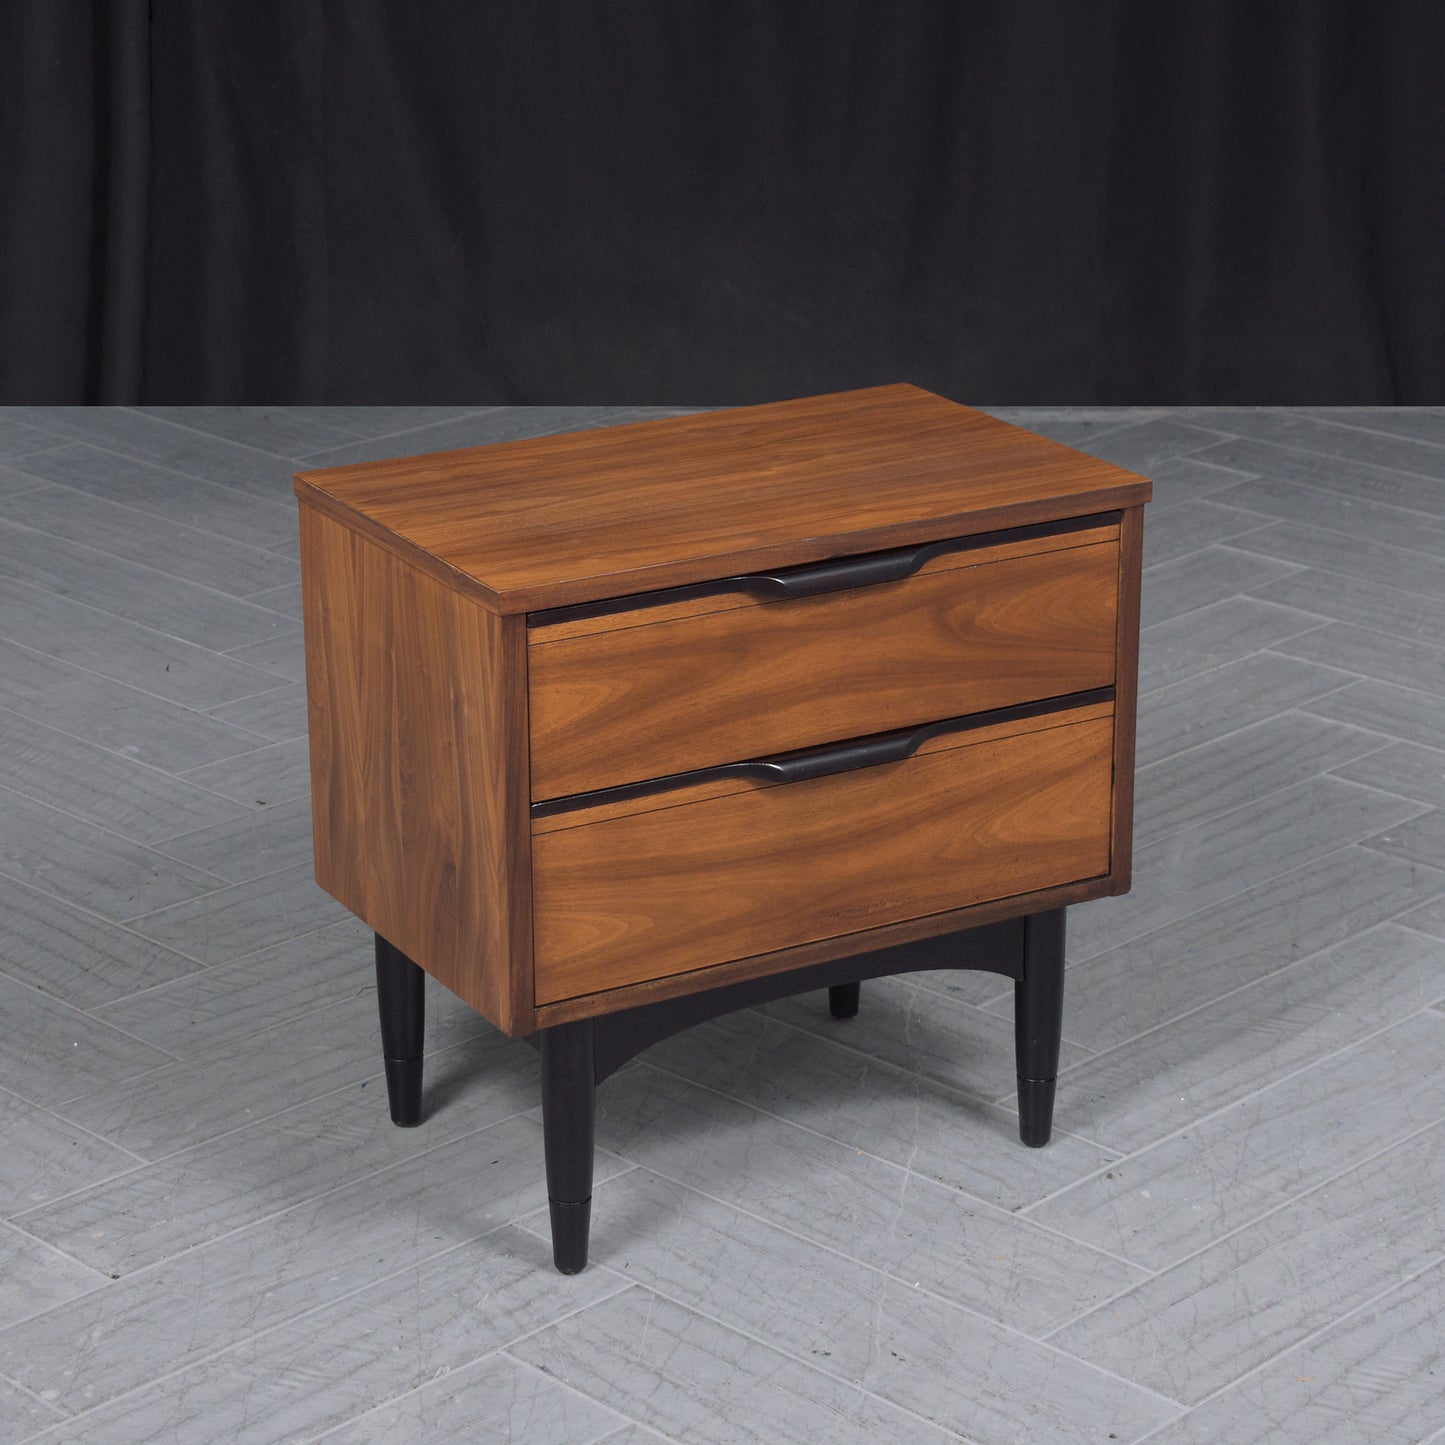 1960s Mid-Century Modern Walnut Nightstand: Ebonized Finish with Carved Details